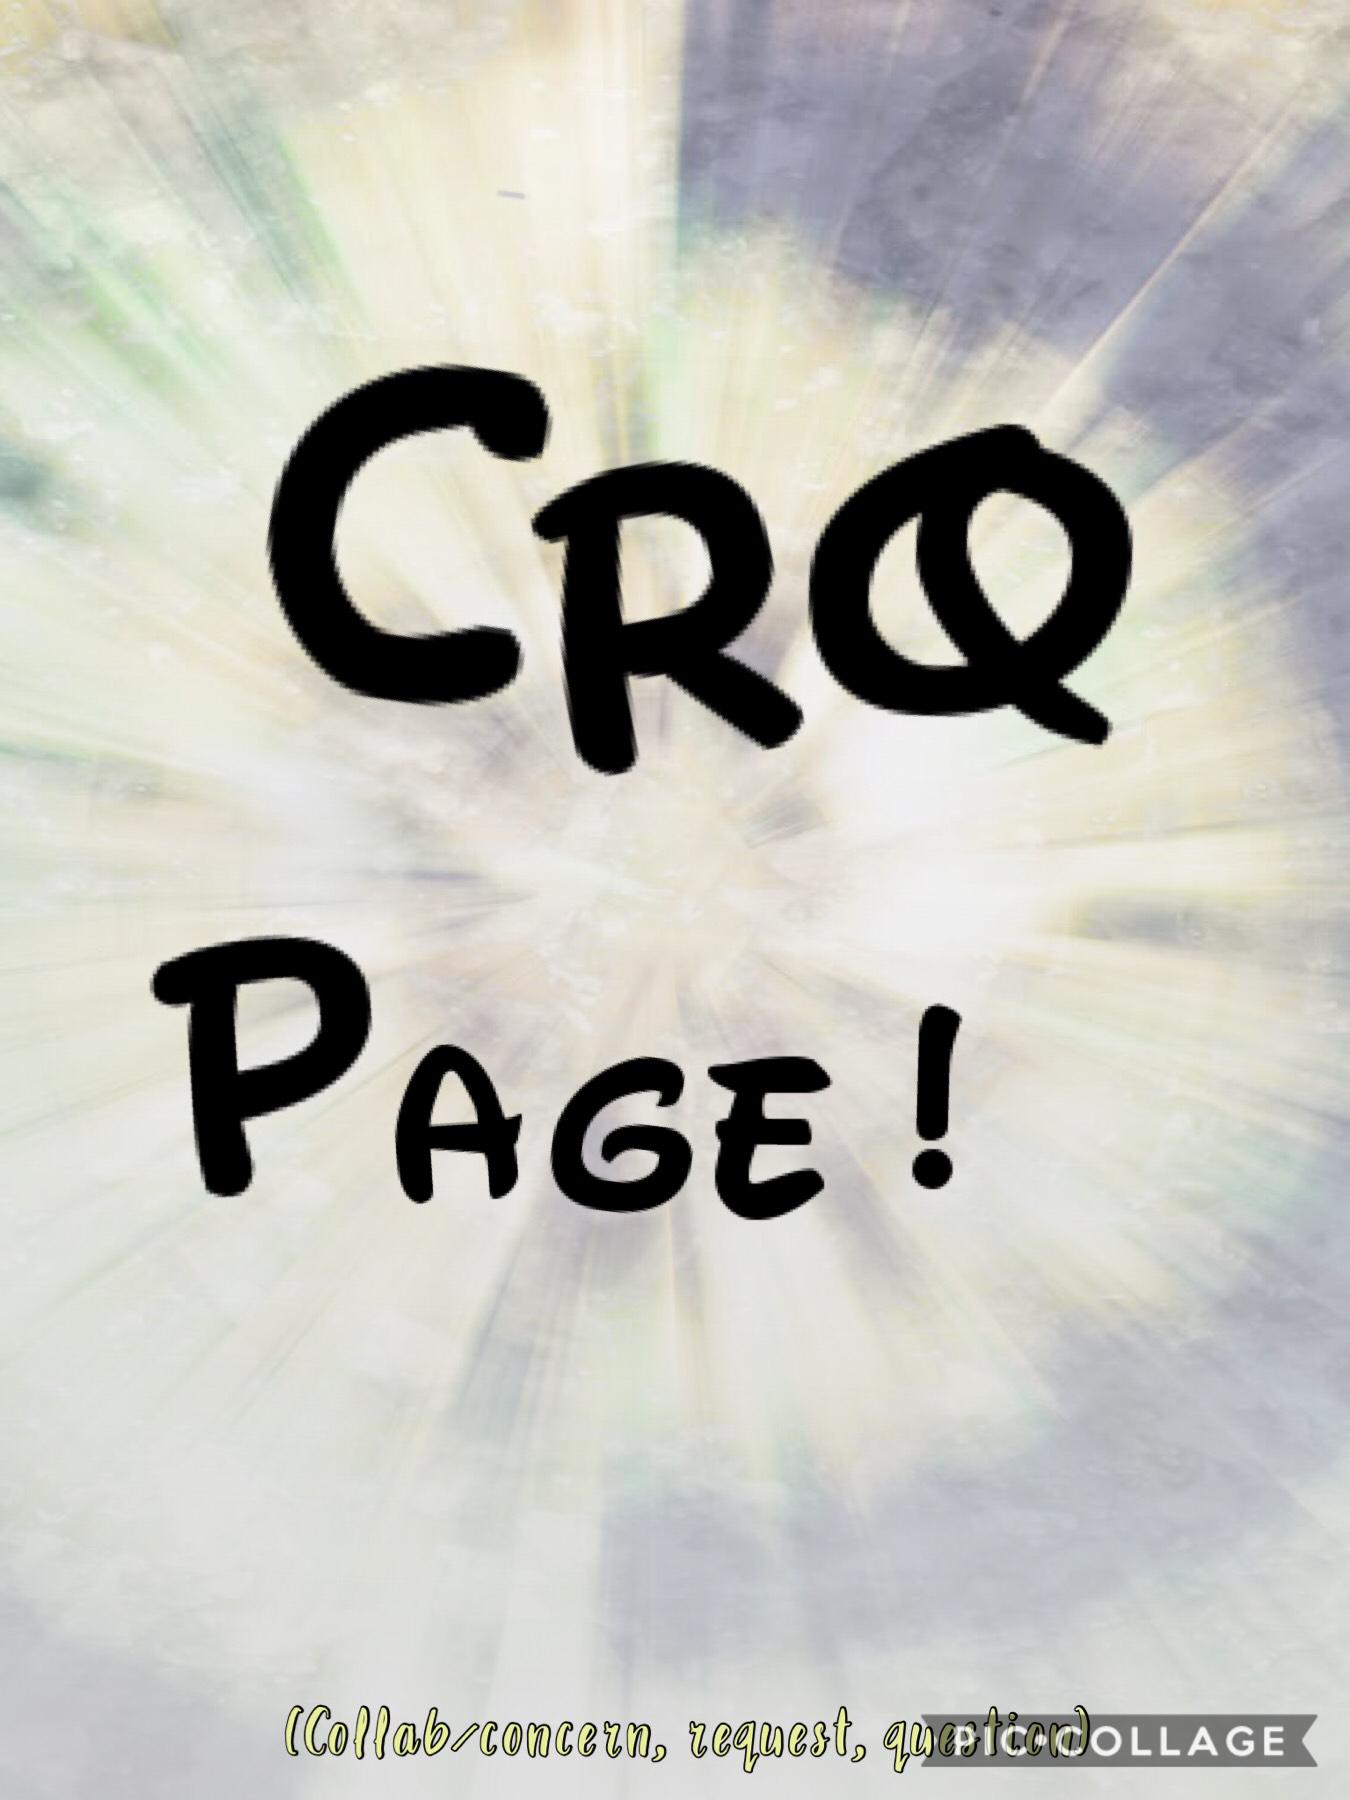 CRQ Page! Comment or remix if you have collabs or concerns, requests, or questions!